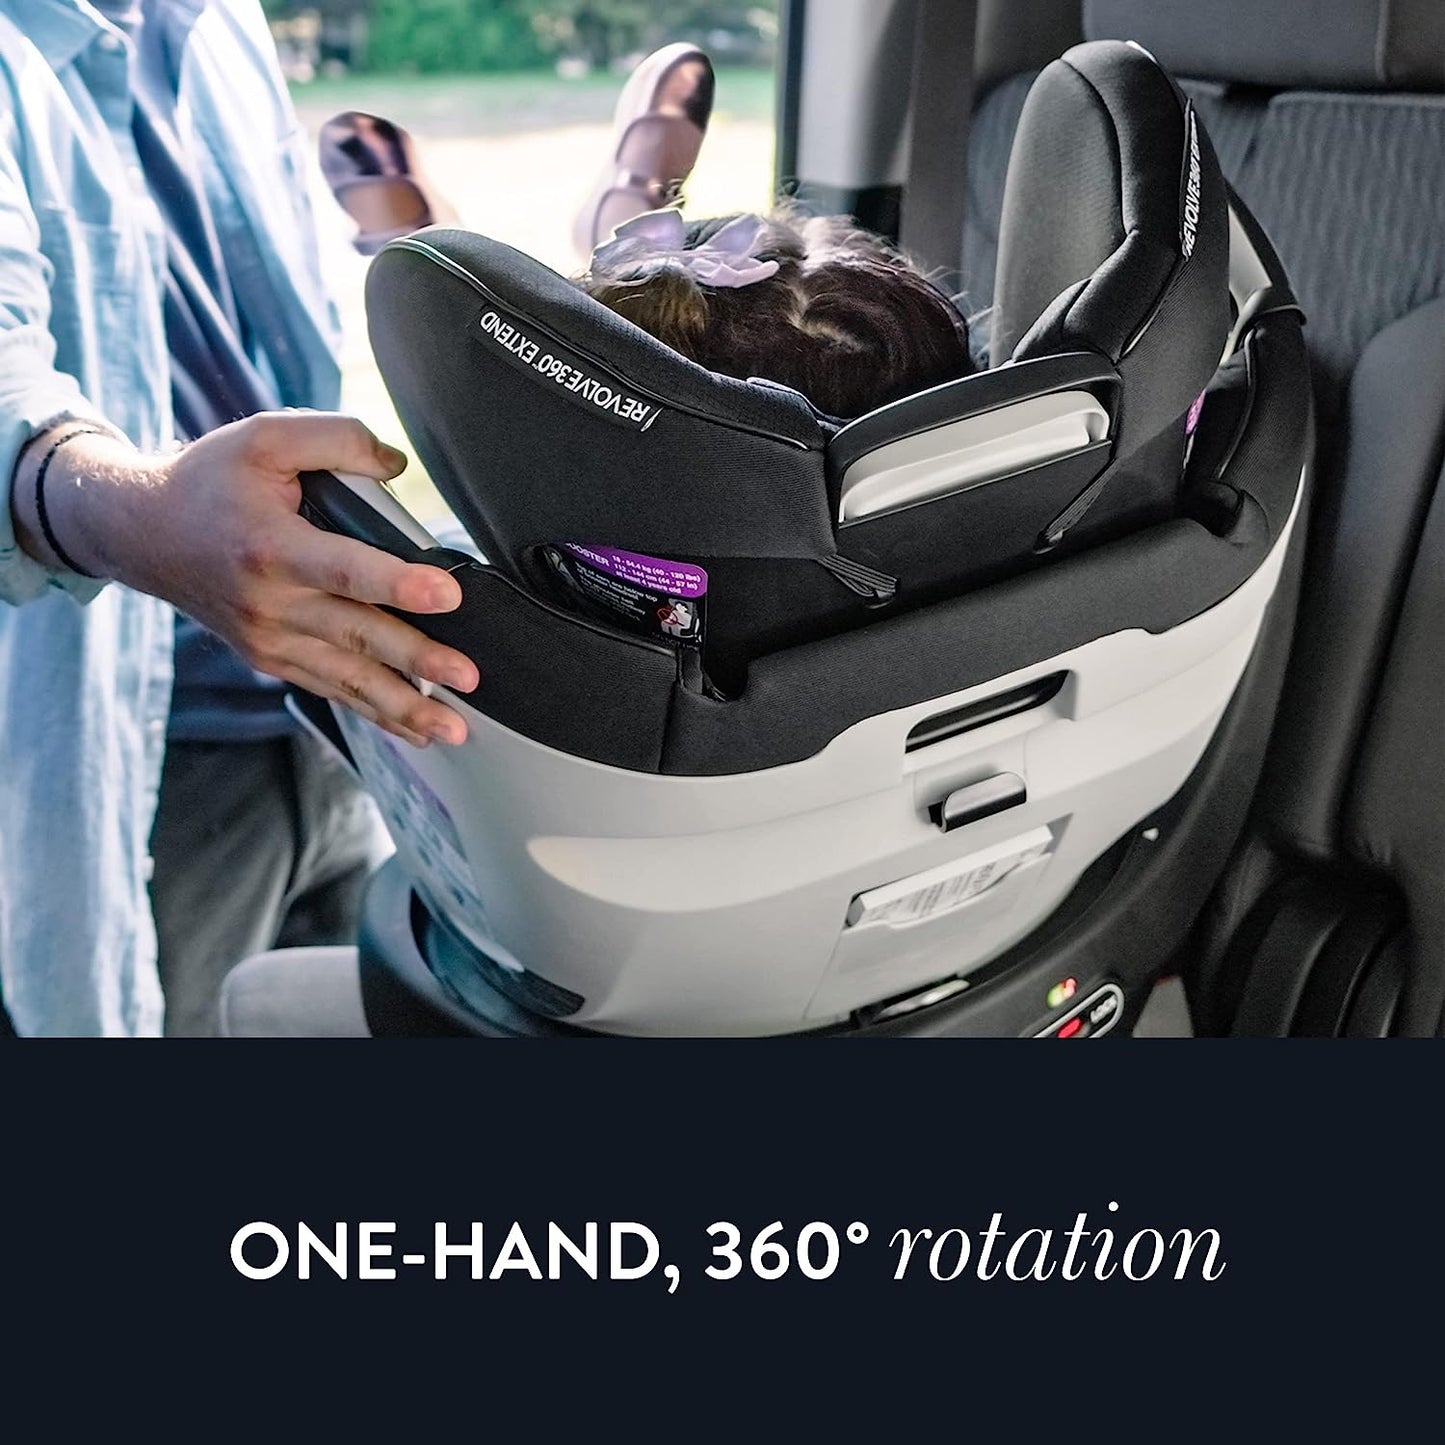 New Evenflo Gold Revolve360 Extend All-in-One Rotational Car Seat (Moonstone Gray)